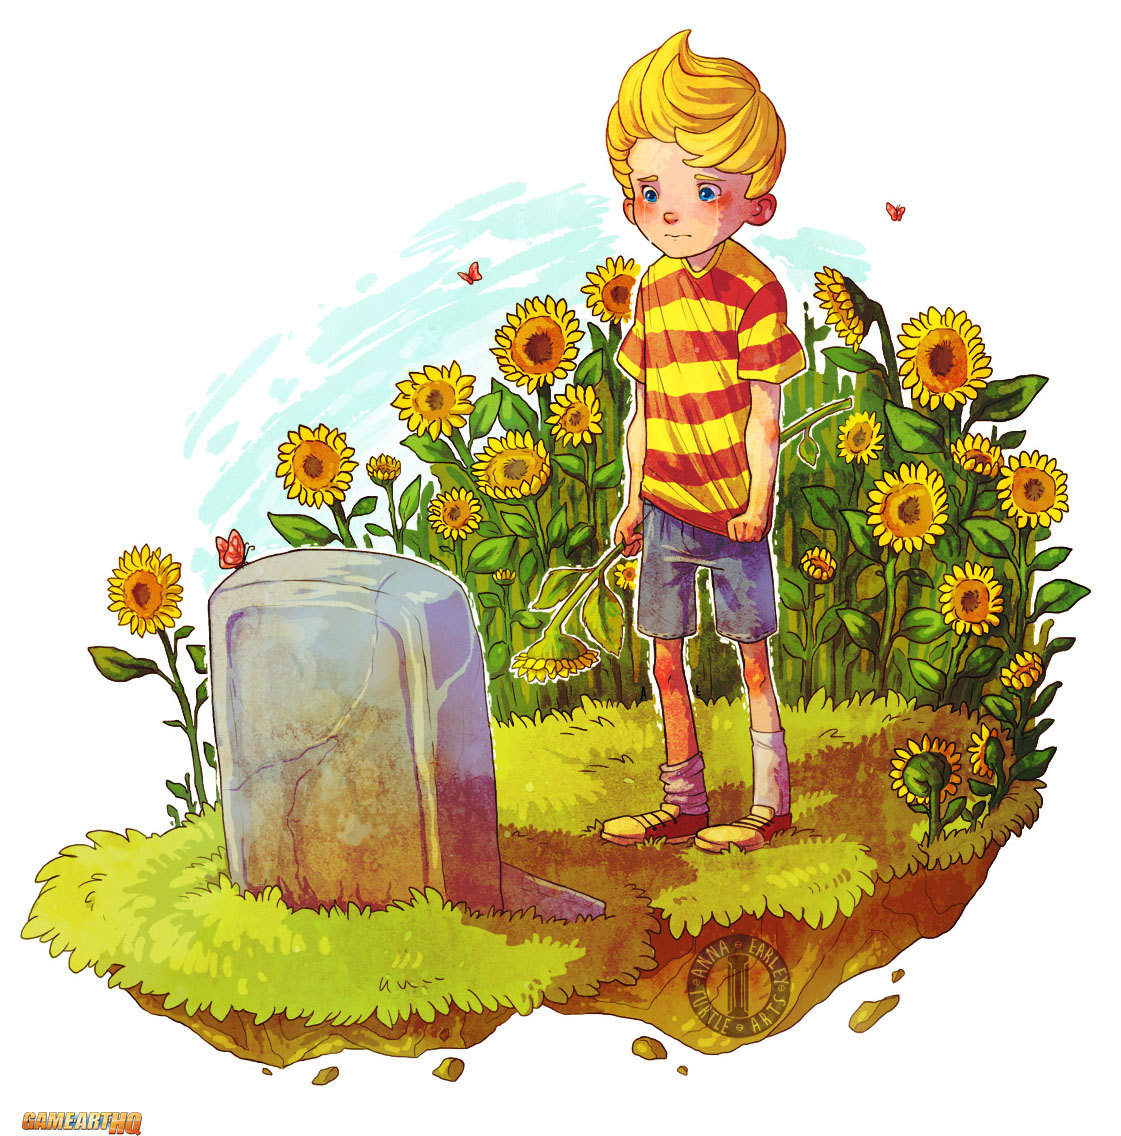 Lucas from Mother 3